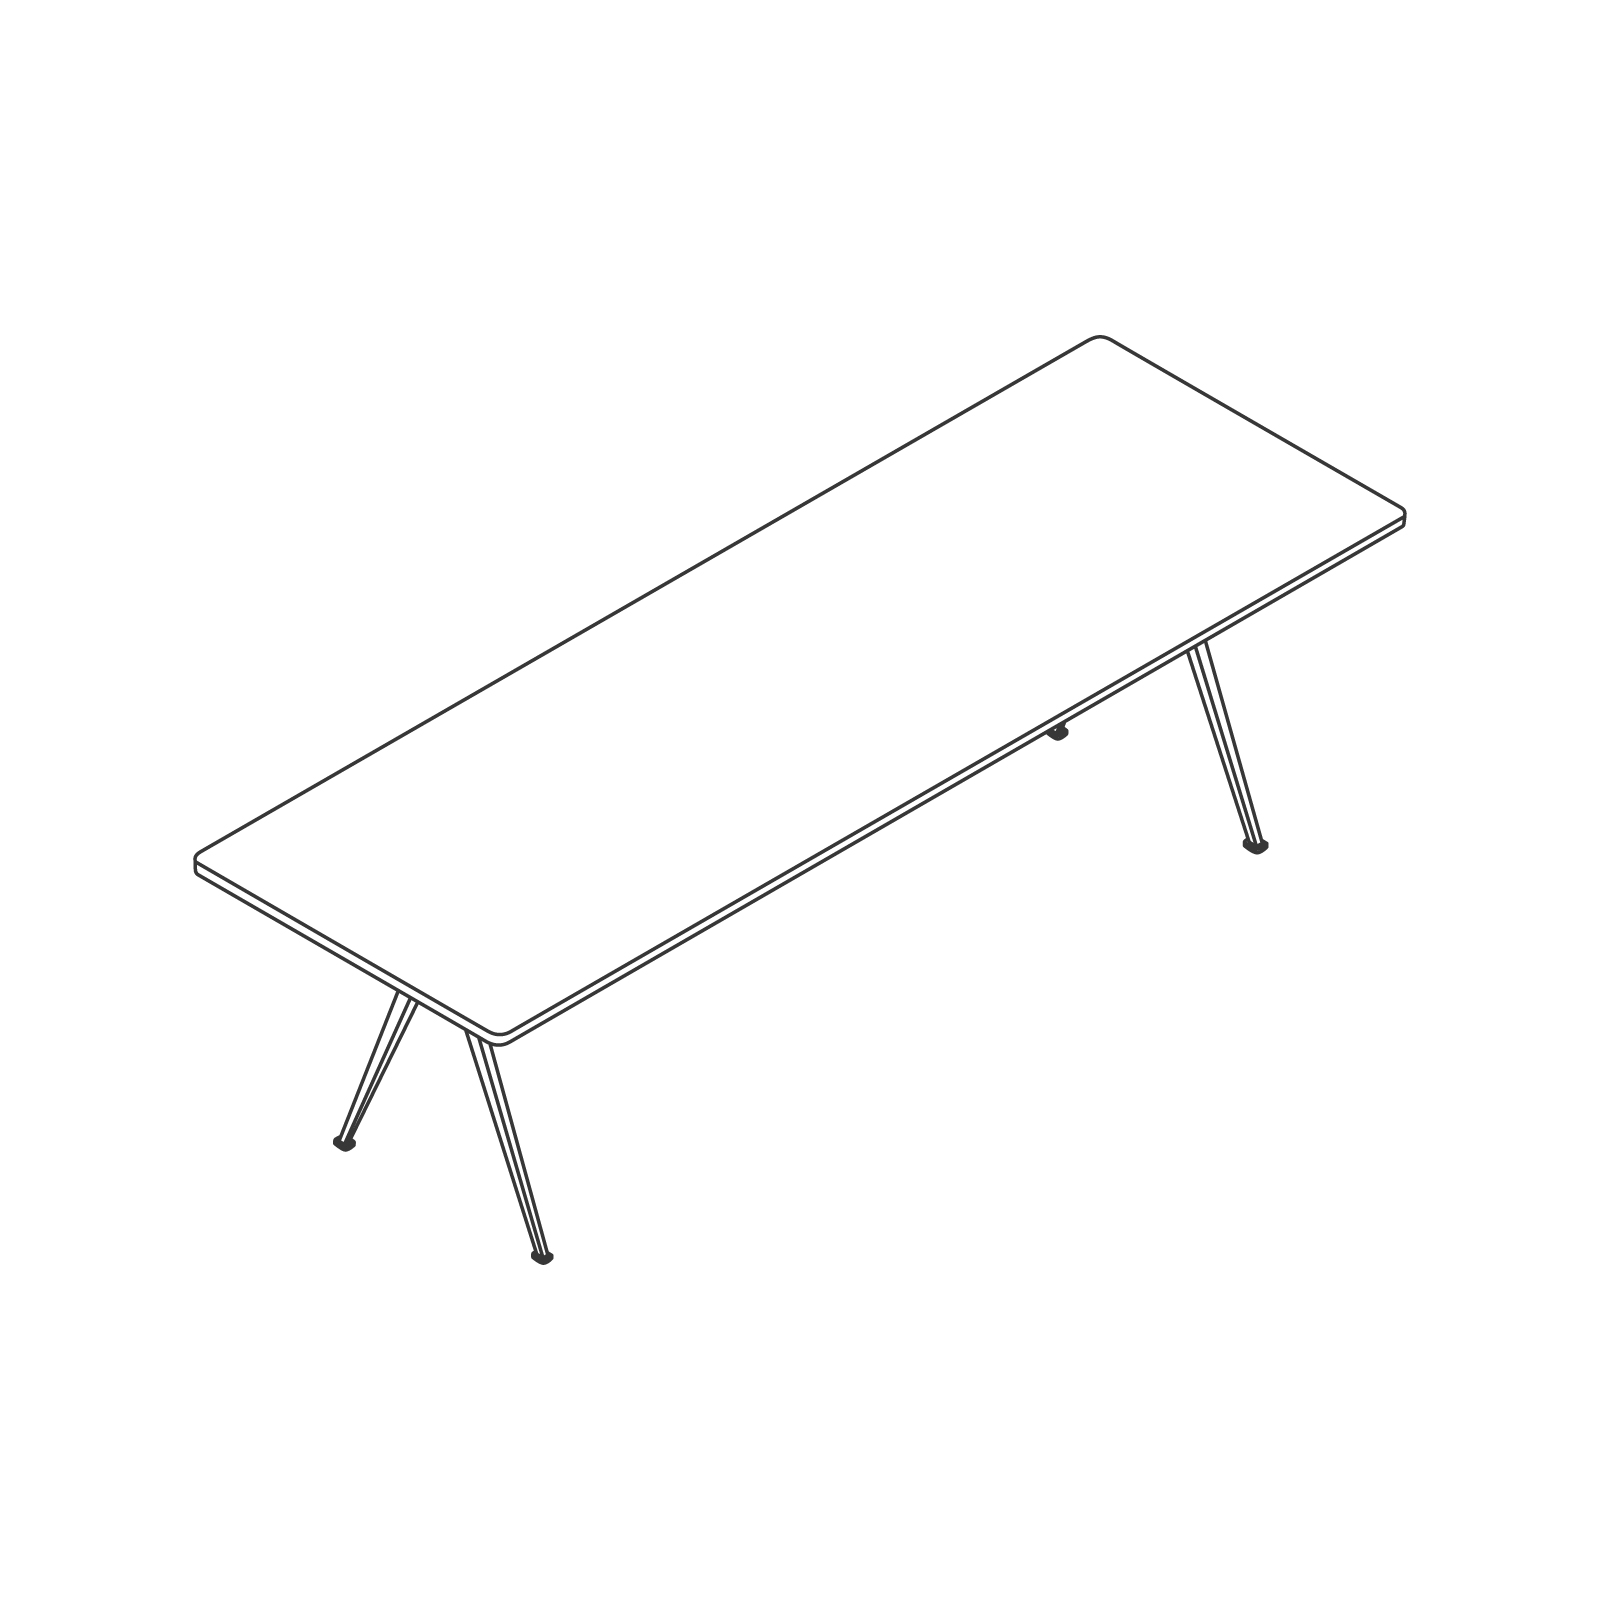 A line drawing - Pyramid Table–With Overhang